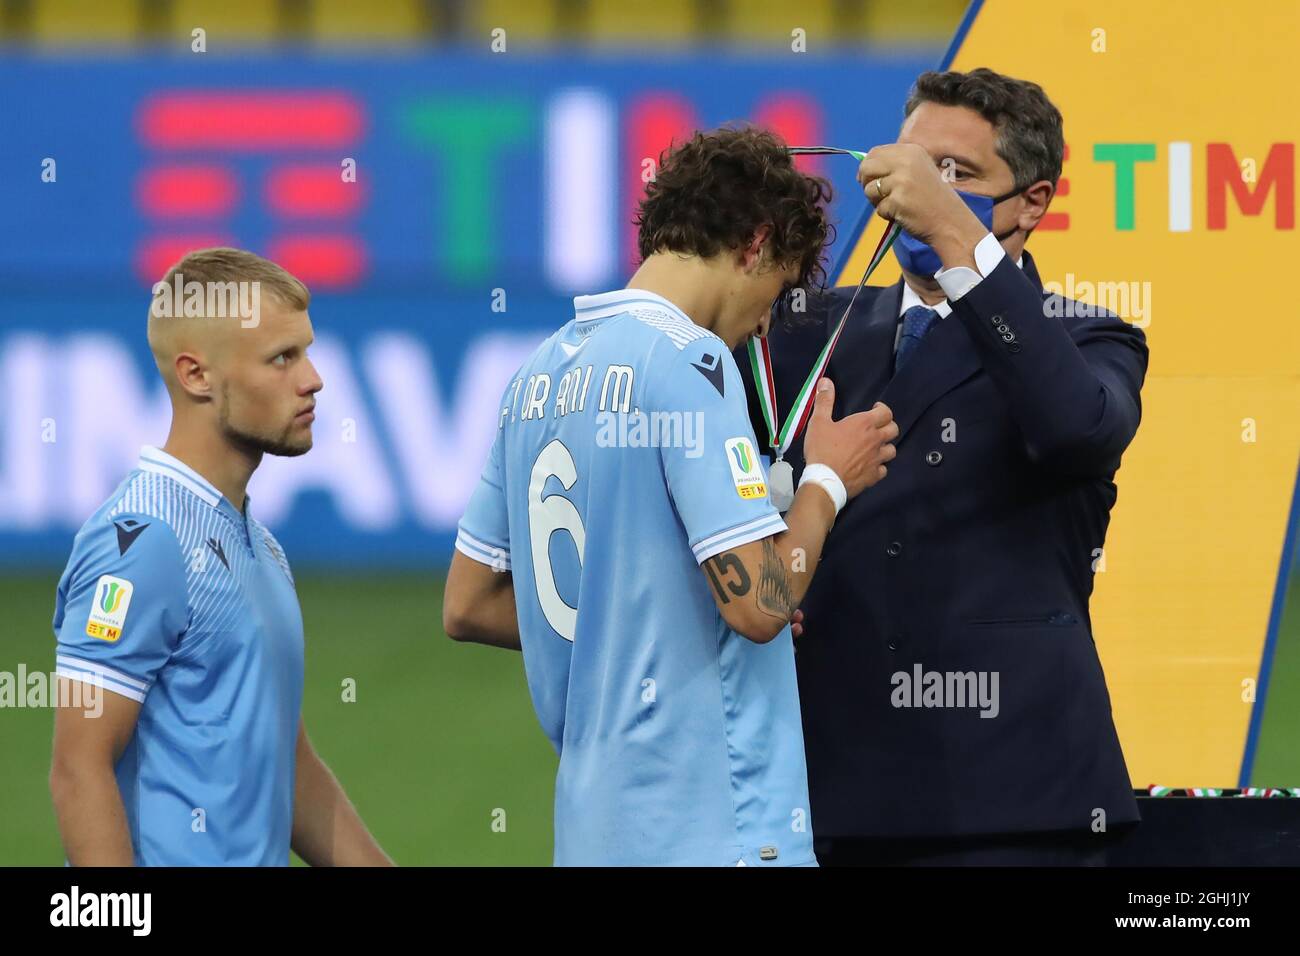 Parma, Italy, 28th April 2021. Romano Floriani Mussolini of SS Lazio receives his runners' up medal from Luigi De Siervo Managing Director of Lega Serie A during the presentation trophy ceremony of the Primavera Coppa Italia match at Stadio Ennio Tardini, Parma. Picture credit should read: Jonathan Moscrop / Sportimage via PA Images Stock Photo